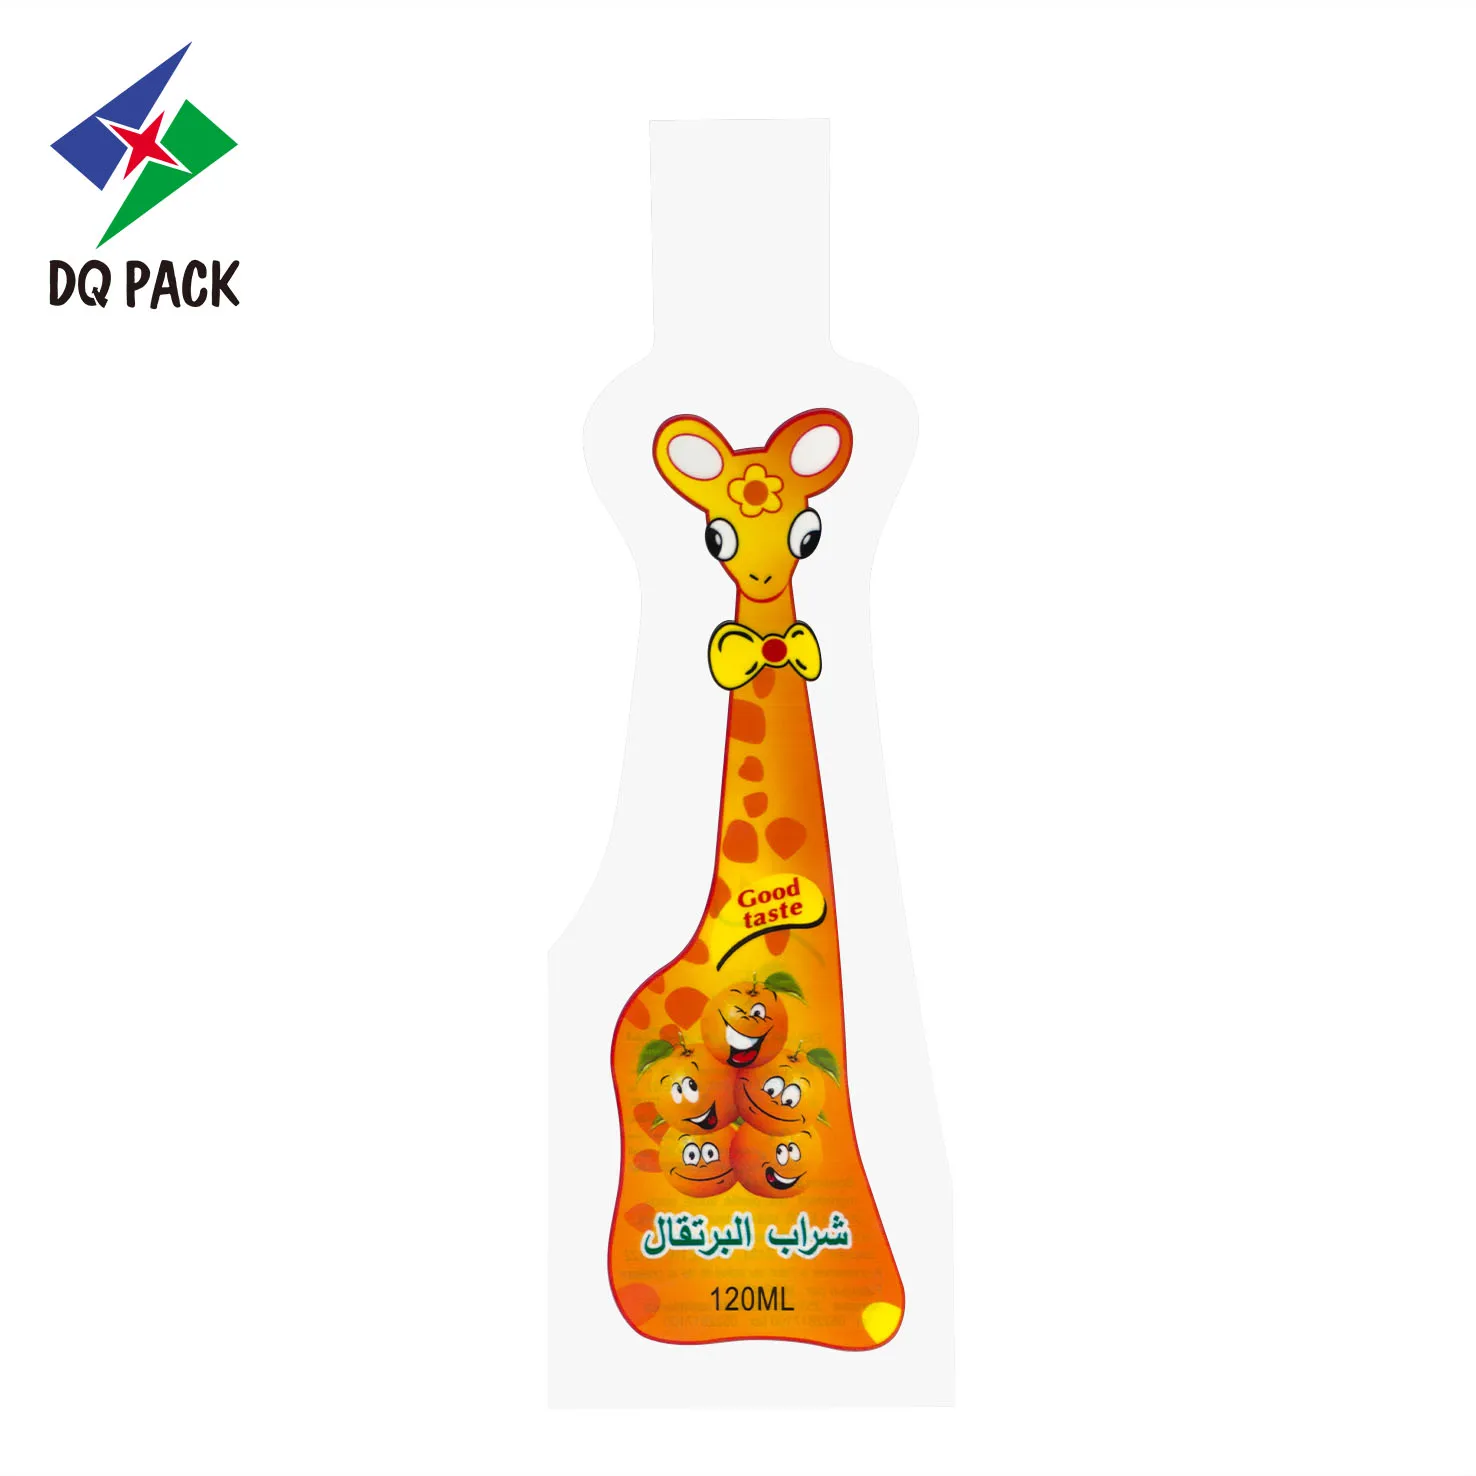 DQ PACK China manufacturer custom printed fruit juice injection pouch